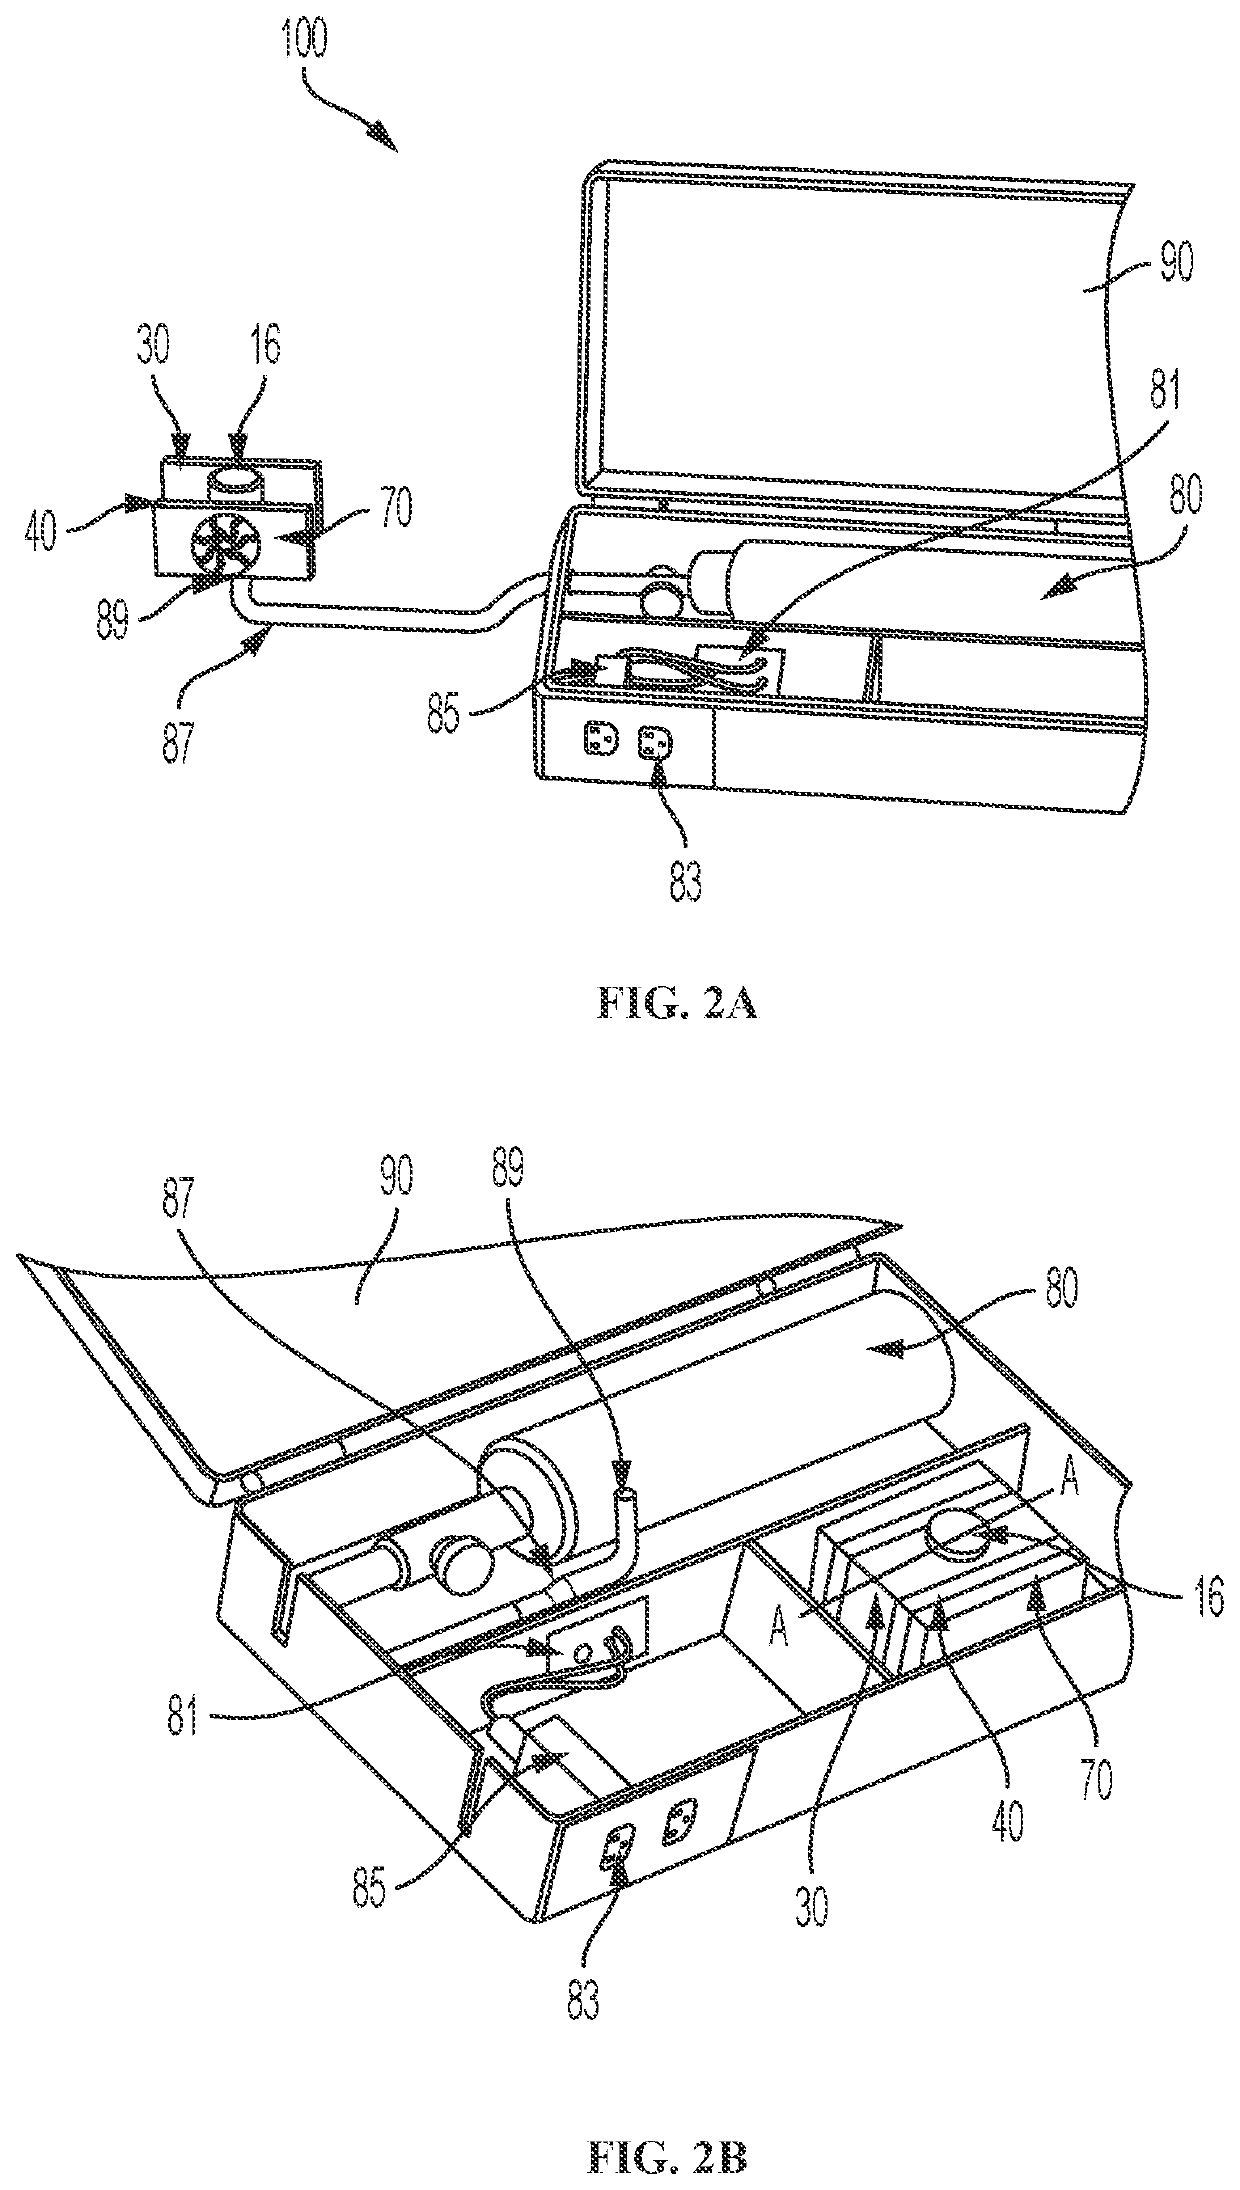 Thermoelectric power generator and combustion apparatus